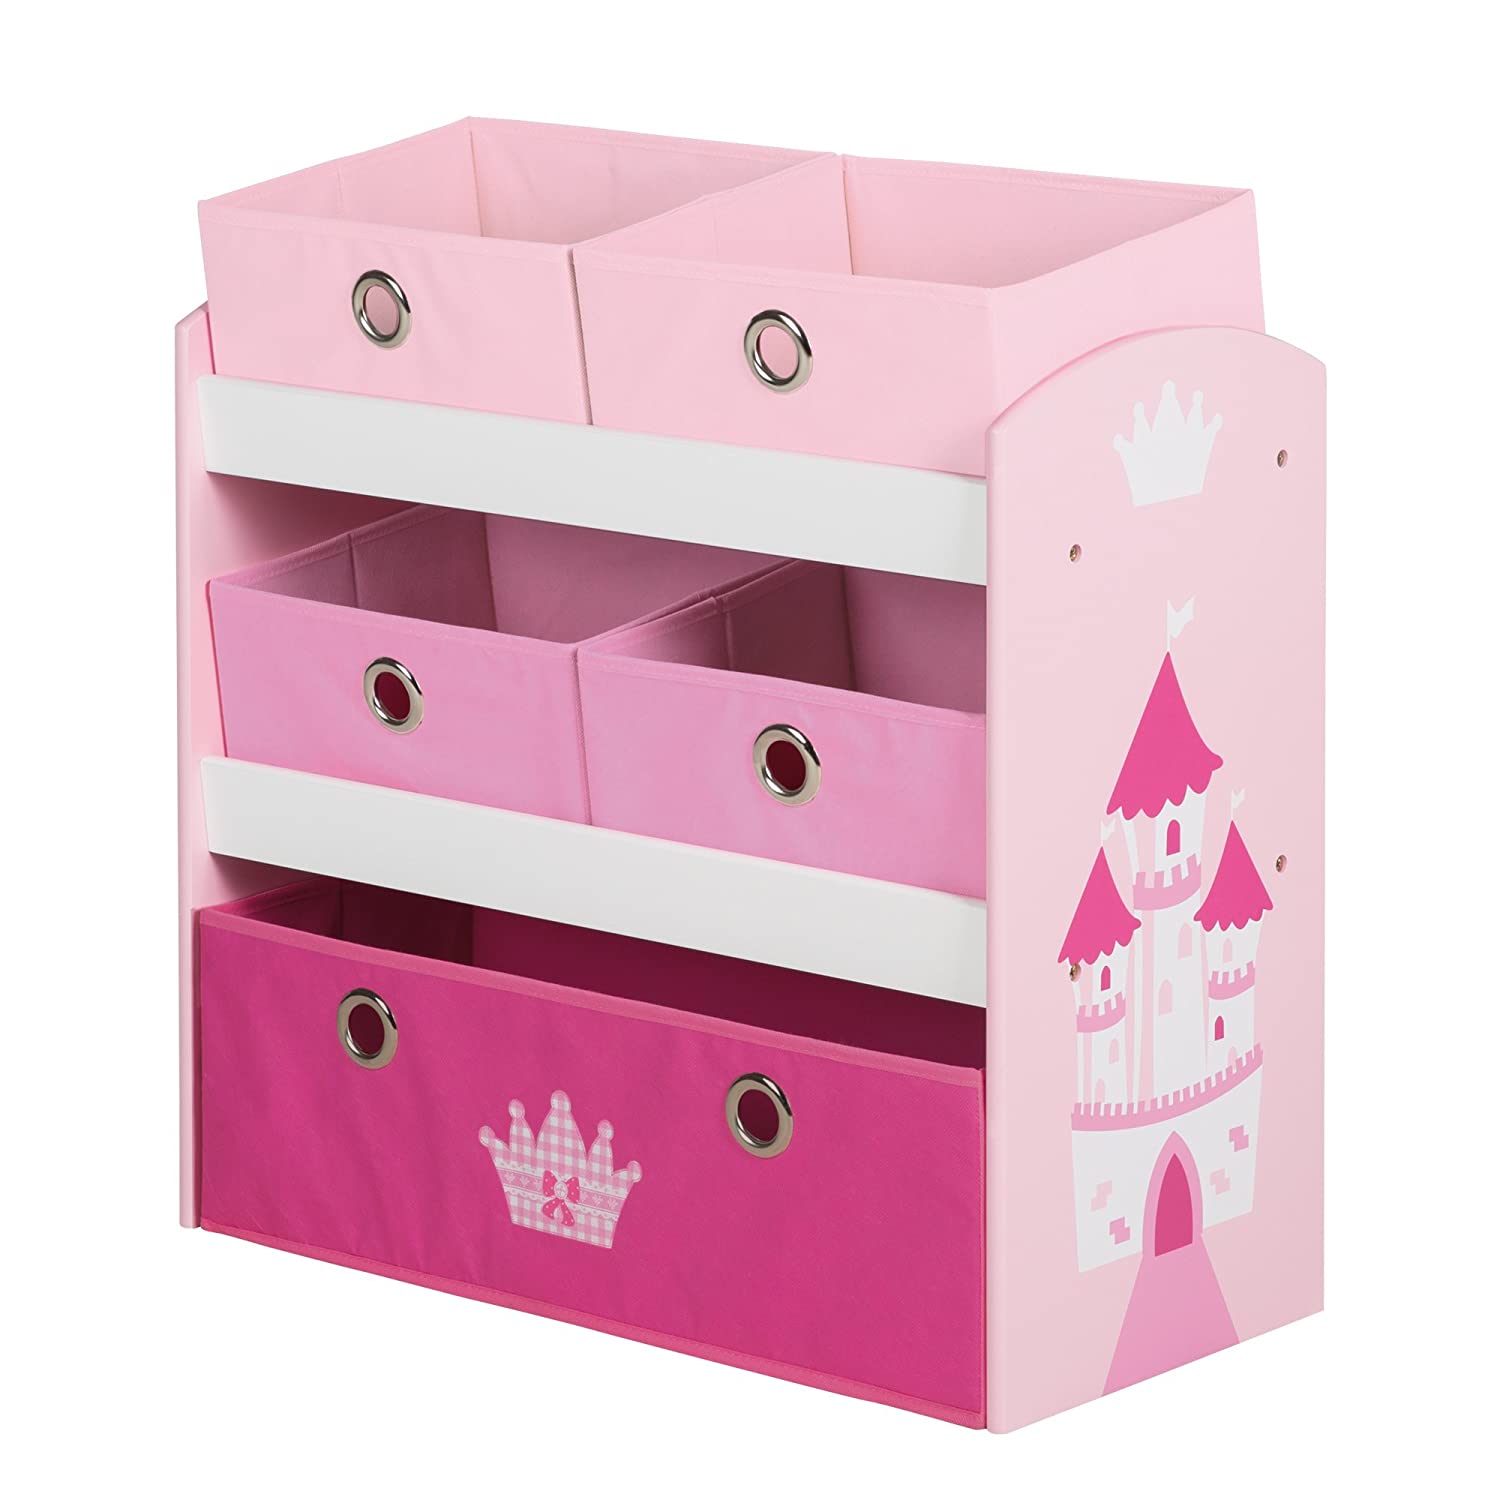 Roba \'Crown\' Toy Shelf, Toy & Storage Shelf for Children\'s Rooms, Incl. 5 Pink Fabric Boxes